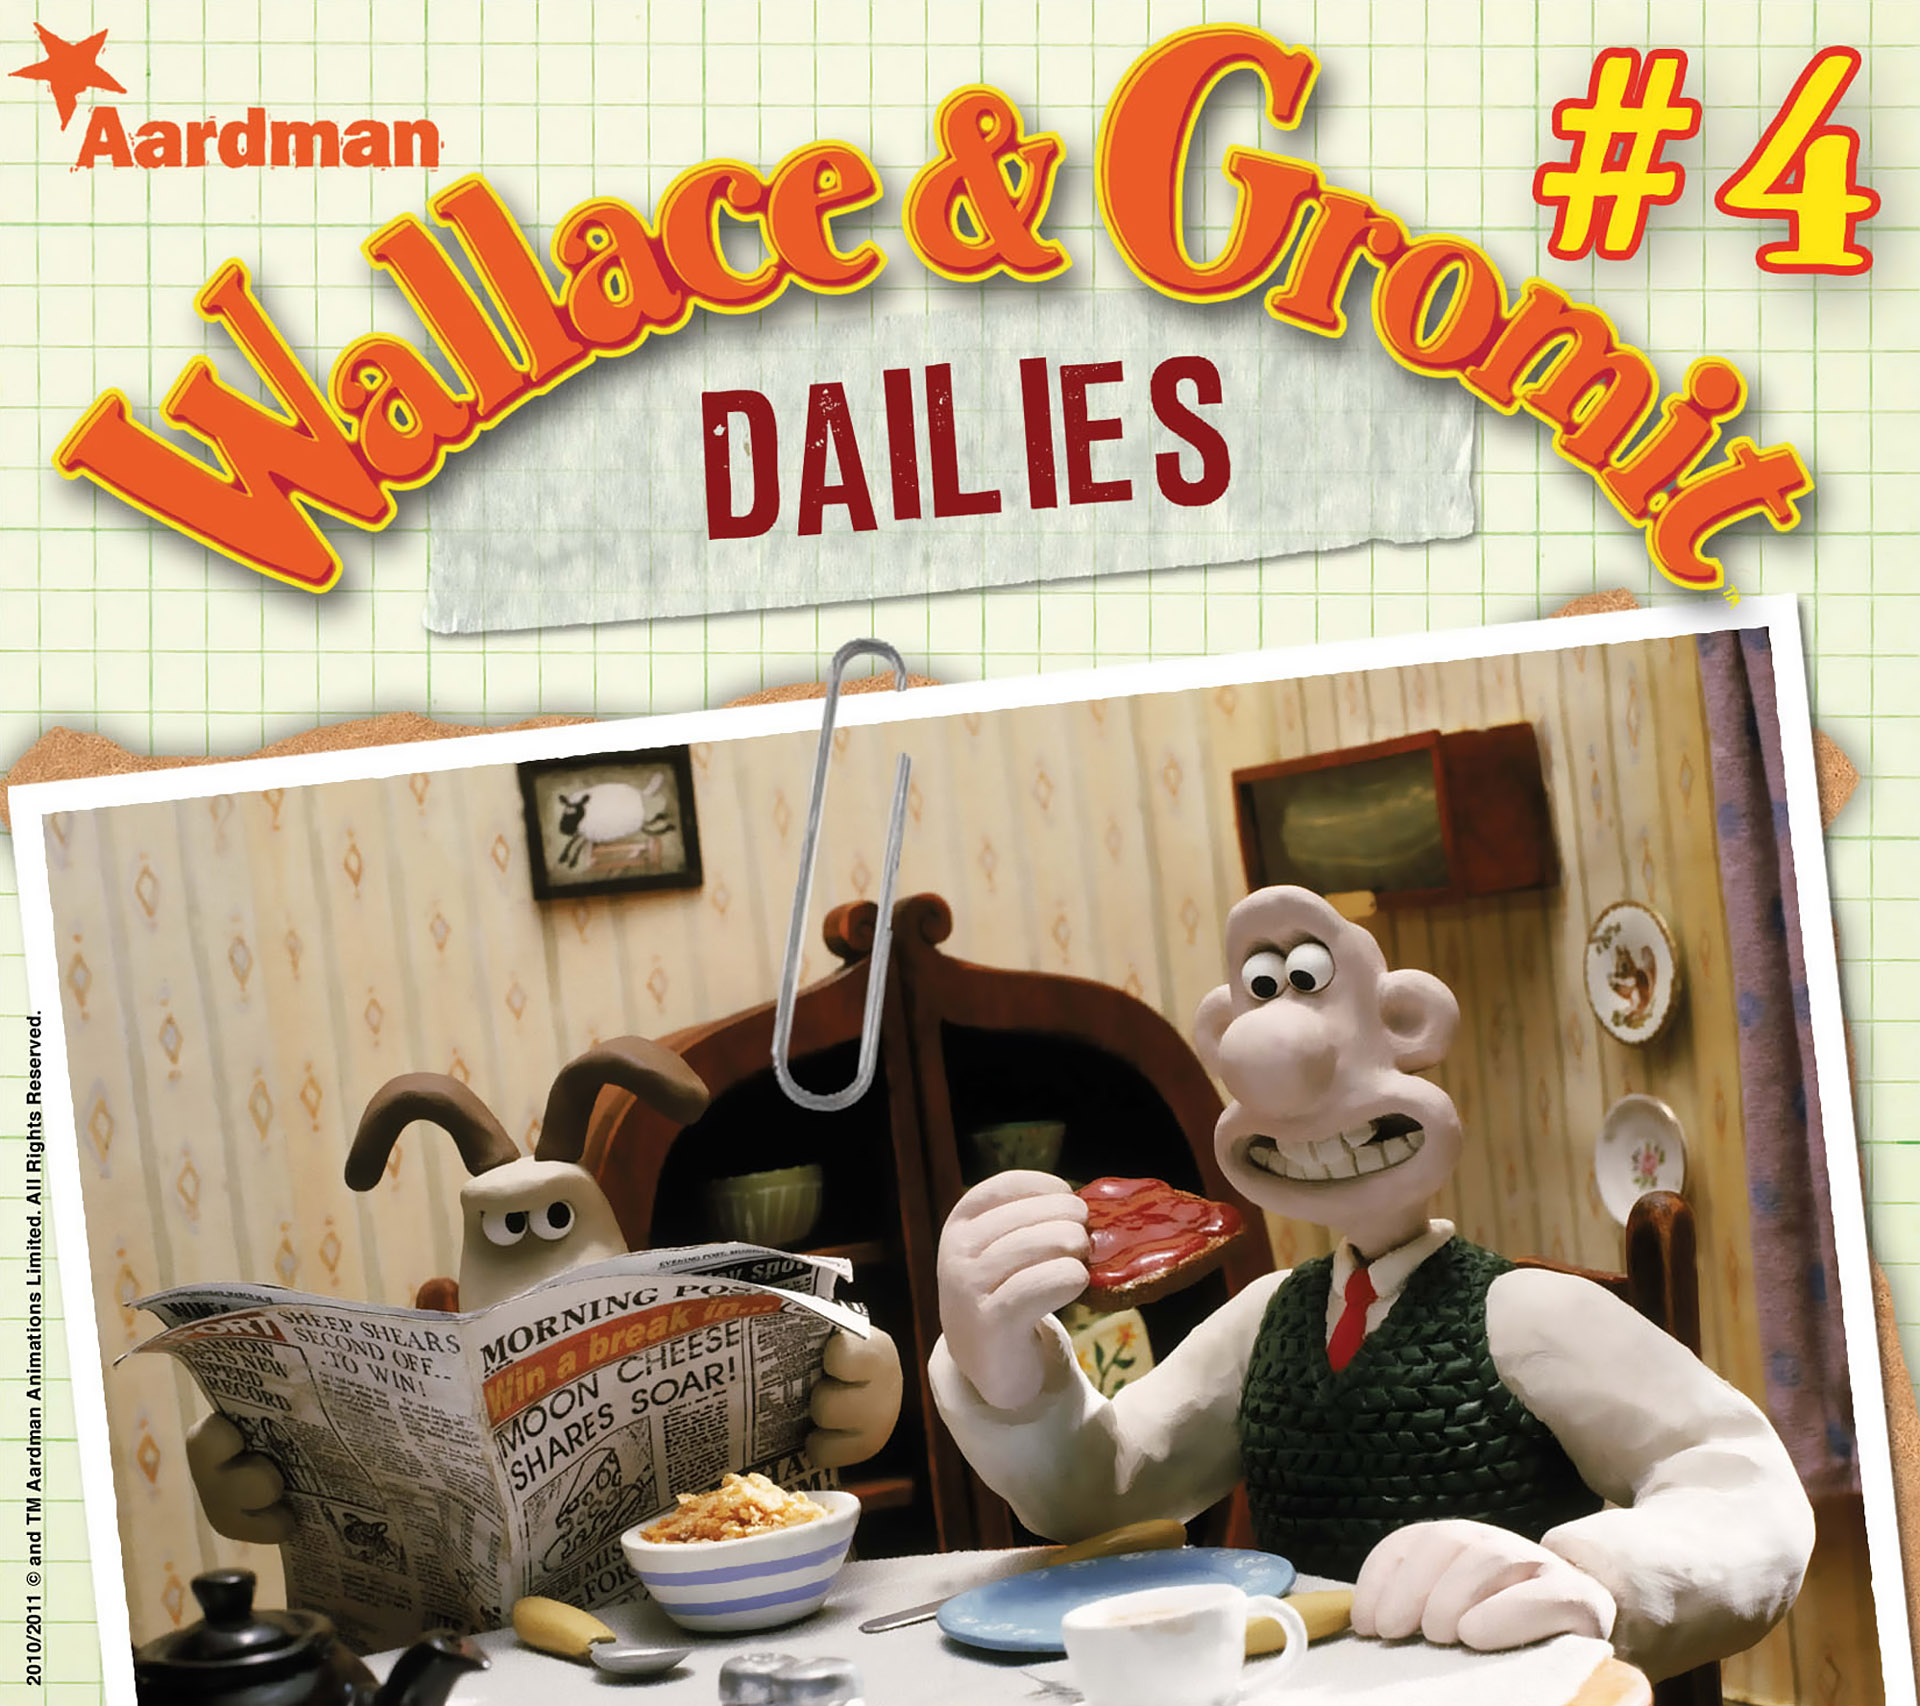 Read online Wallace & Gromit Dailies comic -  Issue #4 - 1